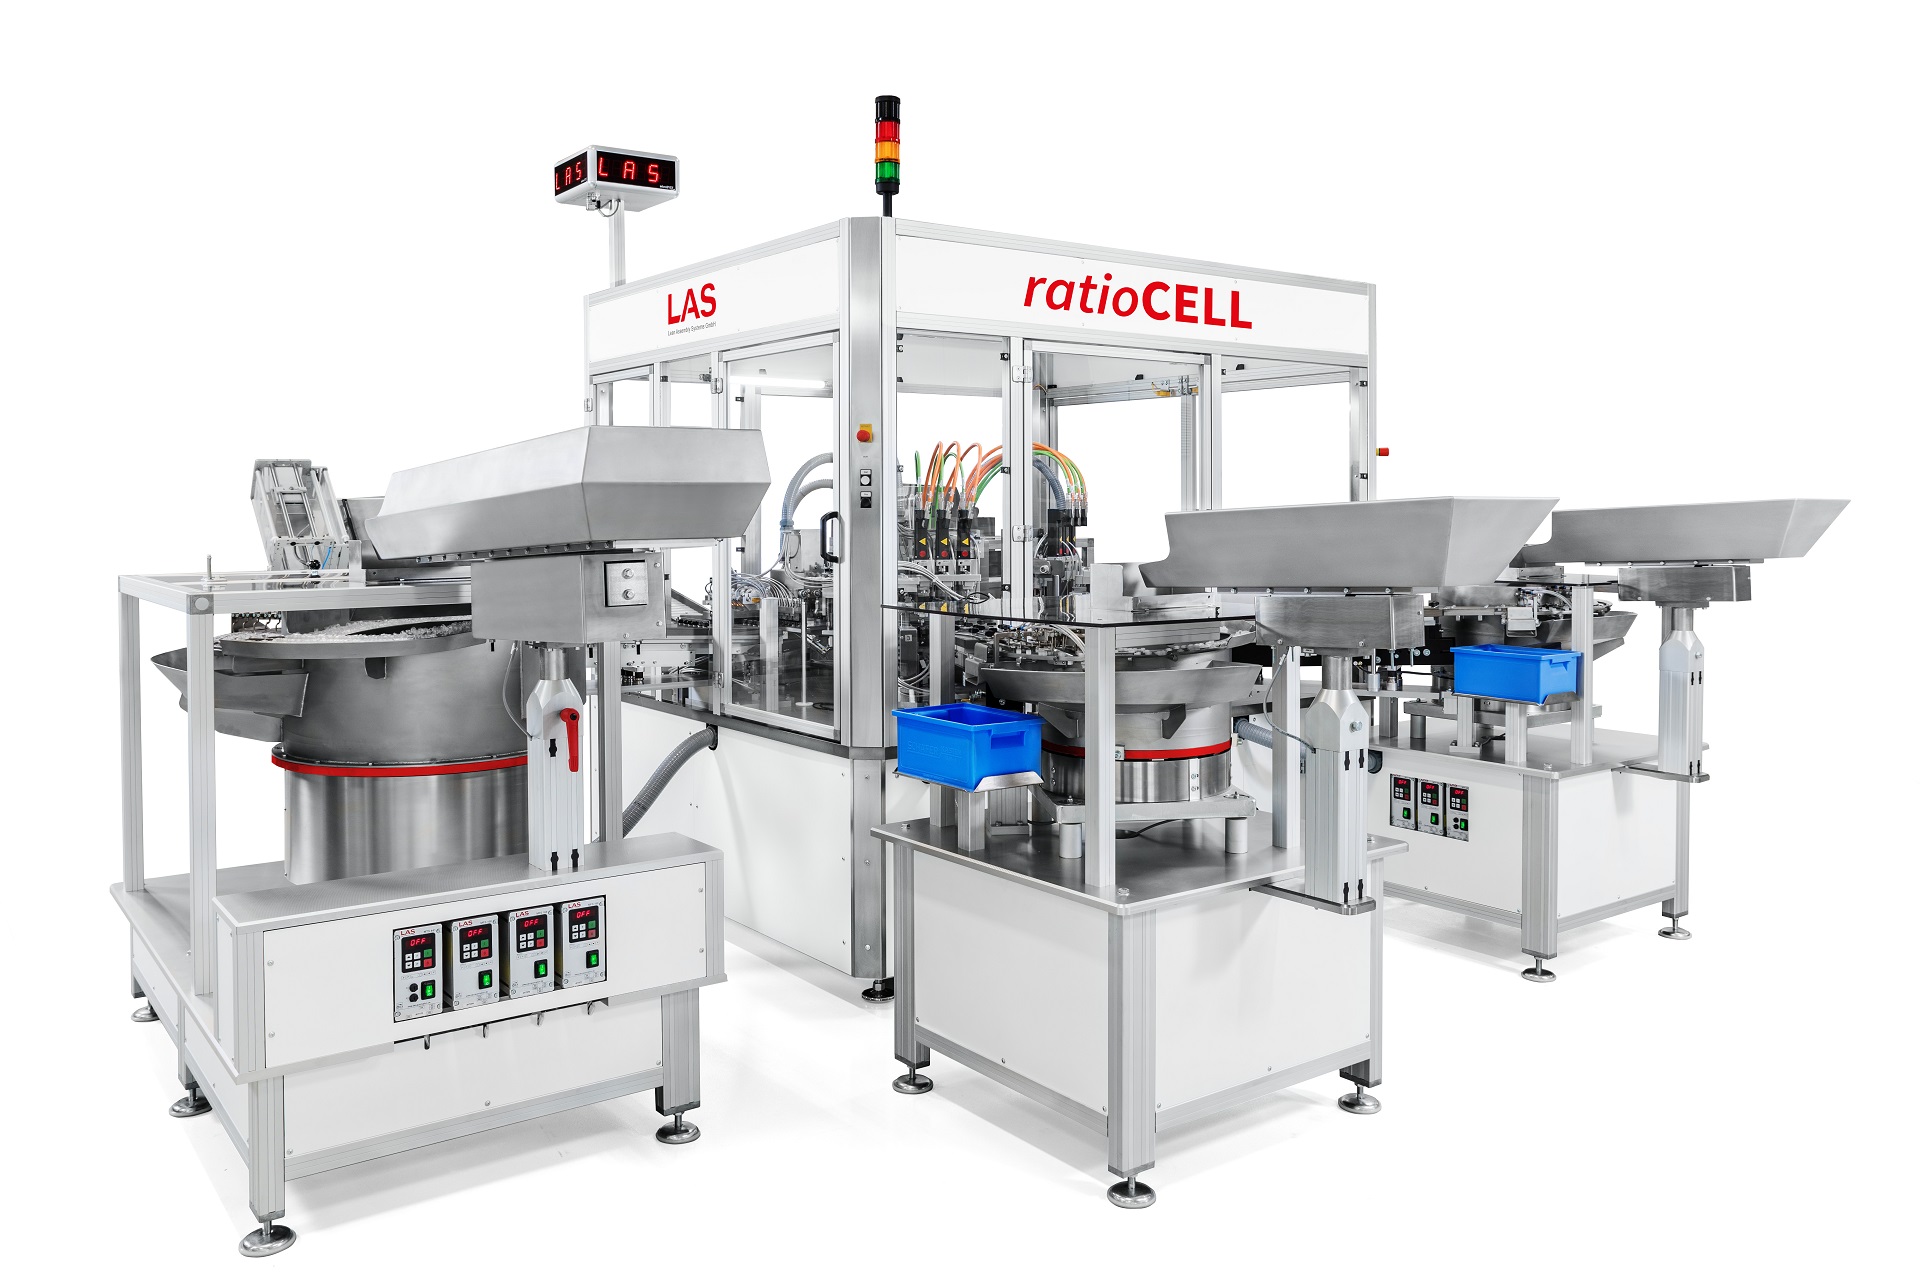 General view of an assembly line for pipettes with feeding technology